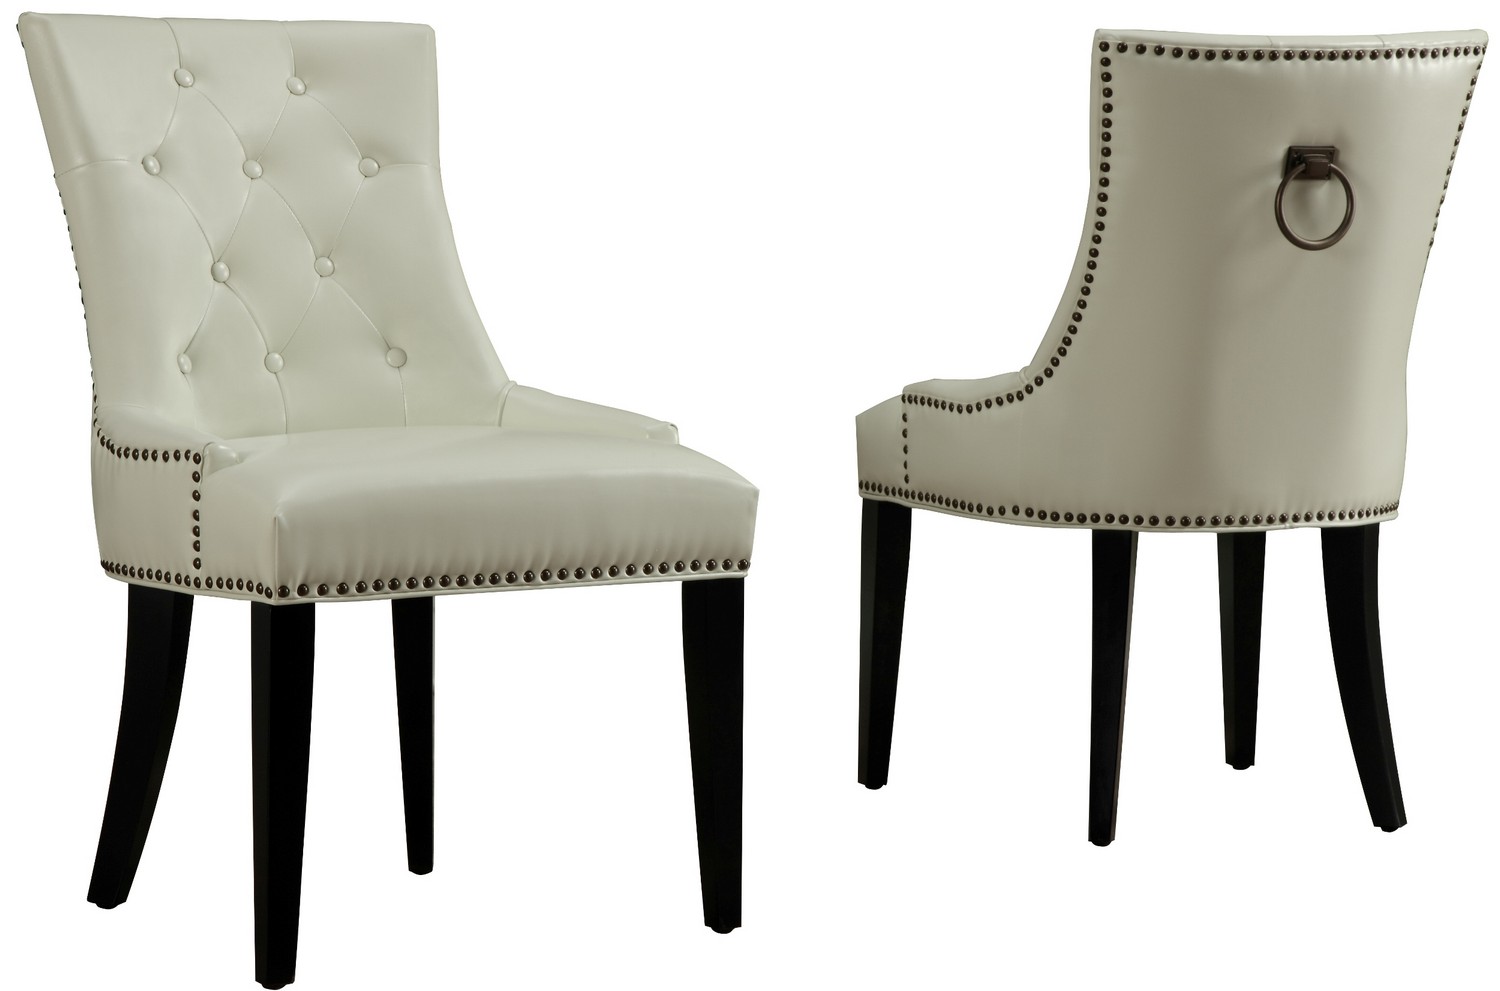 TOV Furniture Uptown Cream Leather Dining Chair